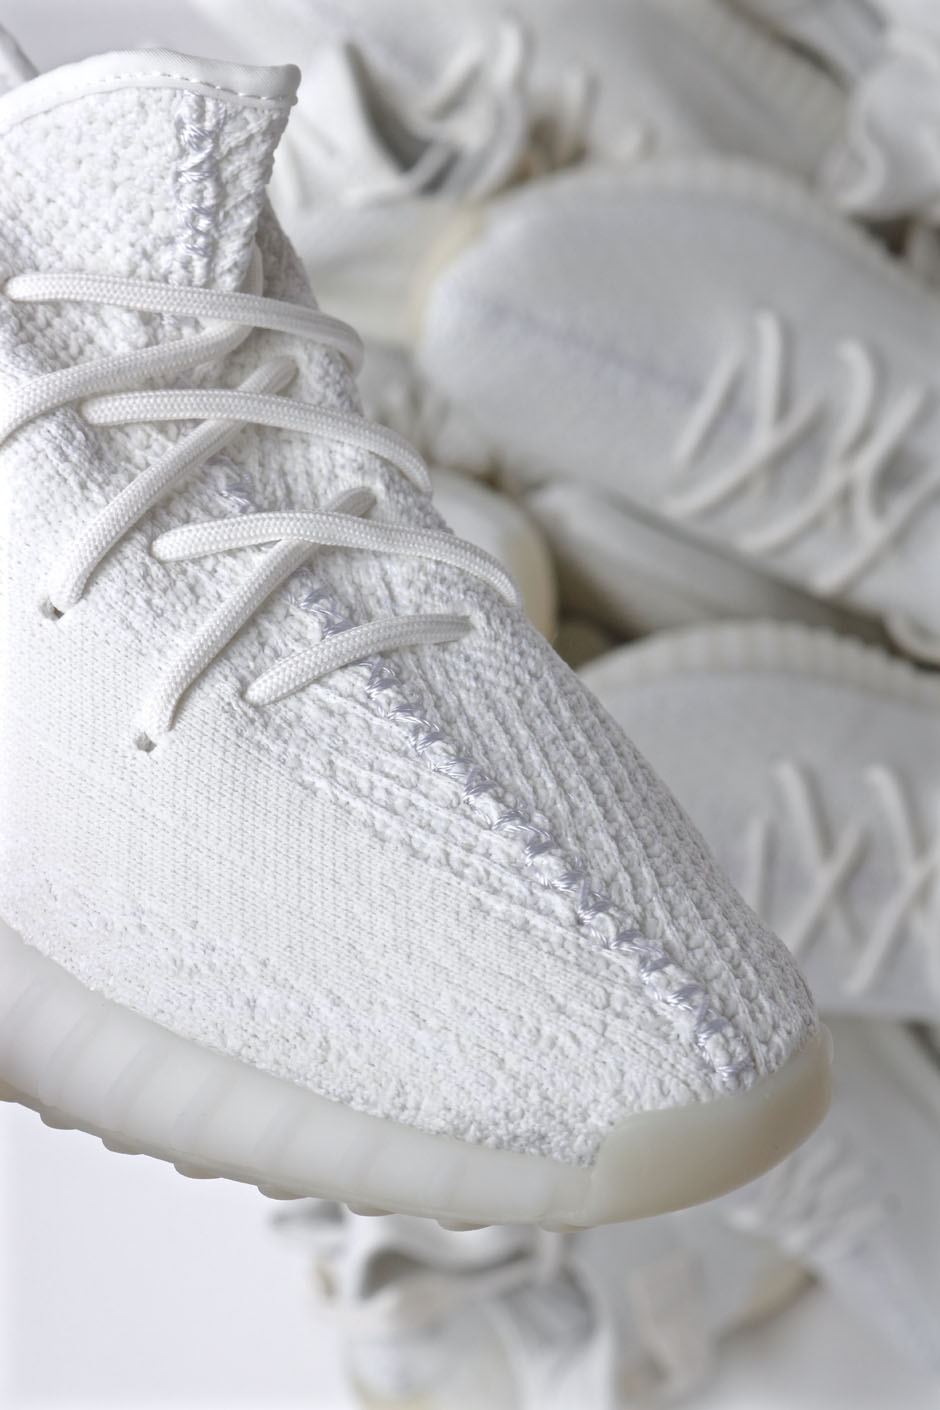 Adidas Yeezy Boost 350 V2 Cream White Detailed Images 05